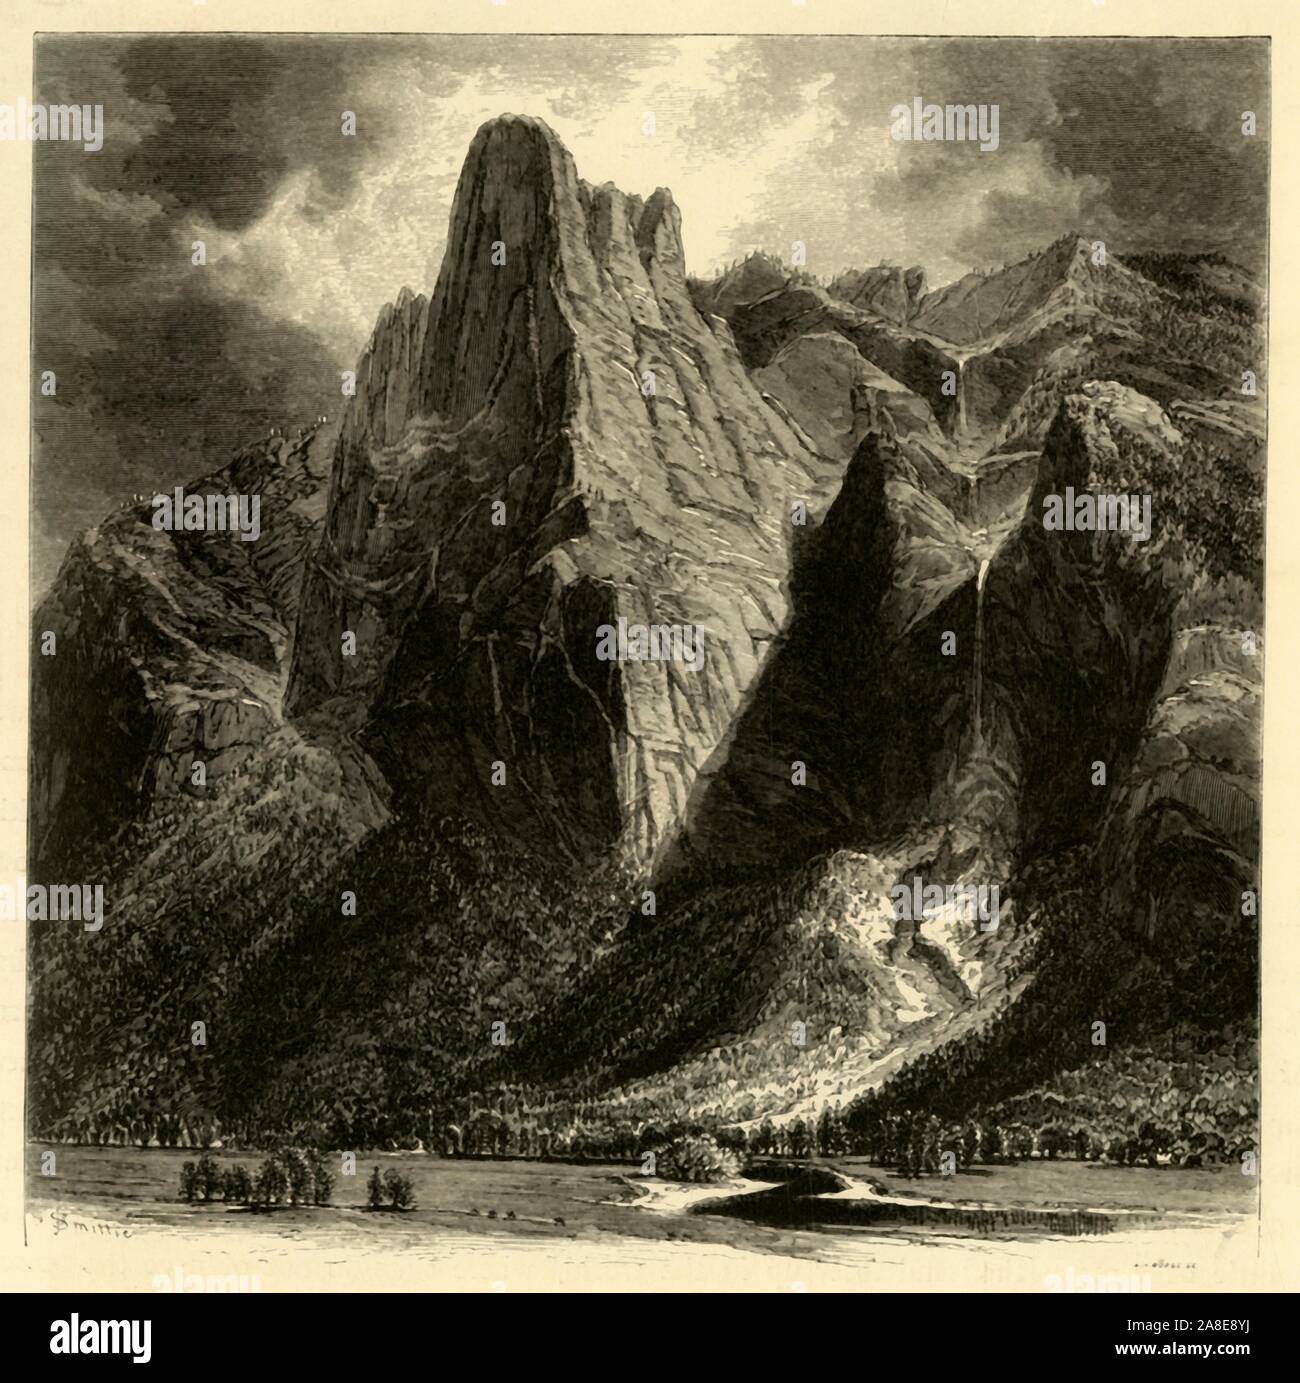 'Sentinel Rock and Fall', 1872. The granite Sentinel Rock, and Sentinel Falls, Yosemite National Park, California, USA. Sentinel Falls is a tiered waterfall 1,920 feet (590 metres) high. From &quot;Picturesque America; or, The Land We Live In, A Delineation by Pen and Pencil of the Mountains, Rivers, Lakes...with Illustrations on Steel and Wood by Eminent American Artists&quot; Vol. I, edited by William Cullen Bryant. [D. Appleton and Company, New York, 1872] Stock Photo